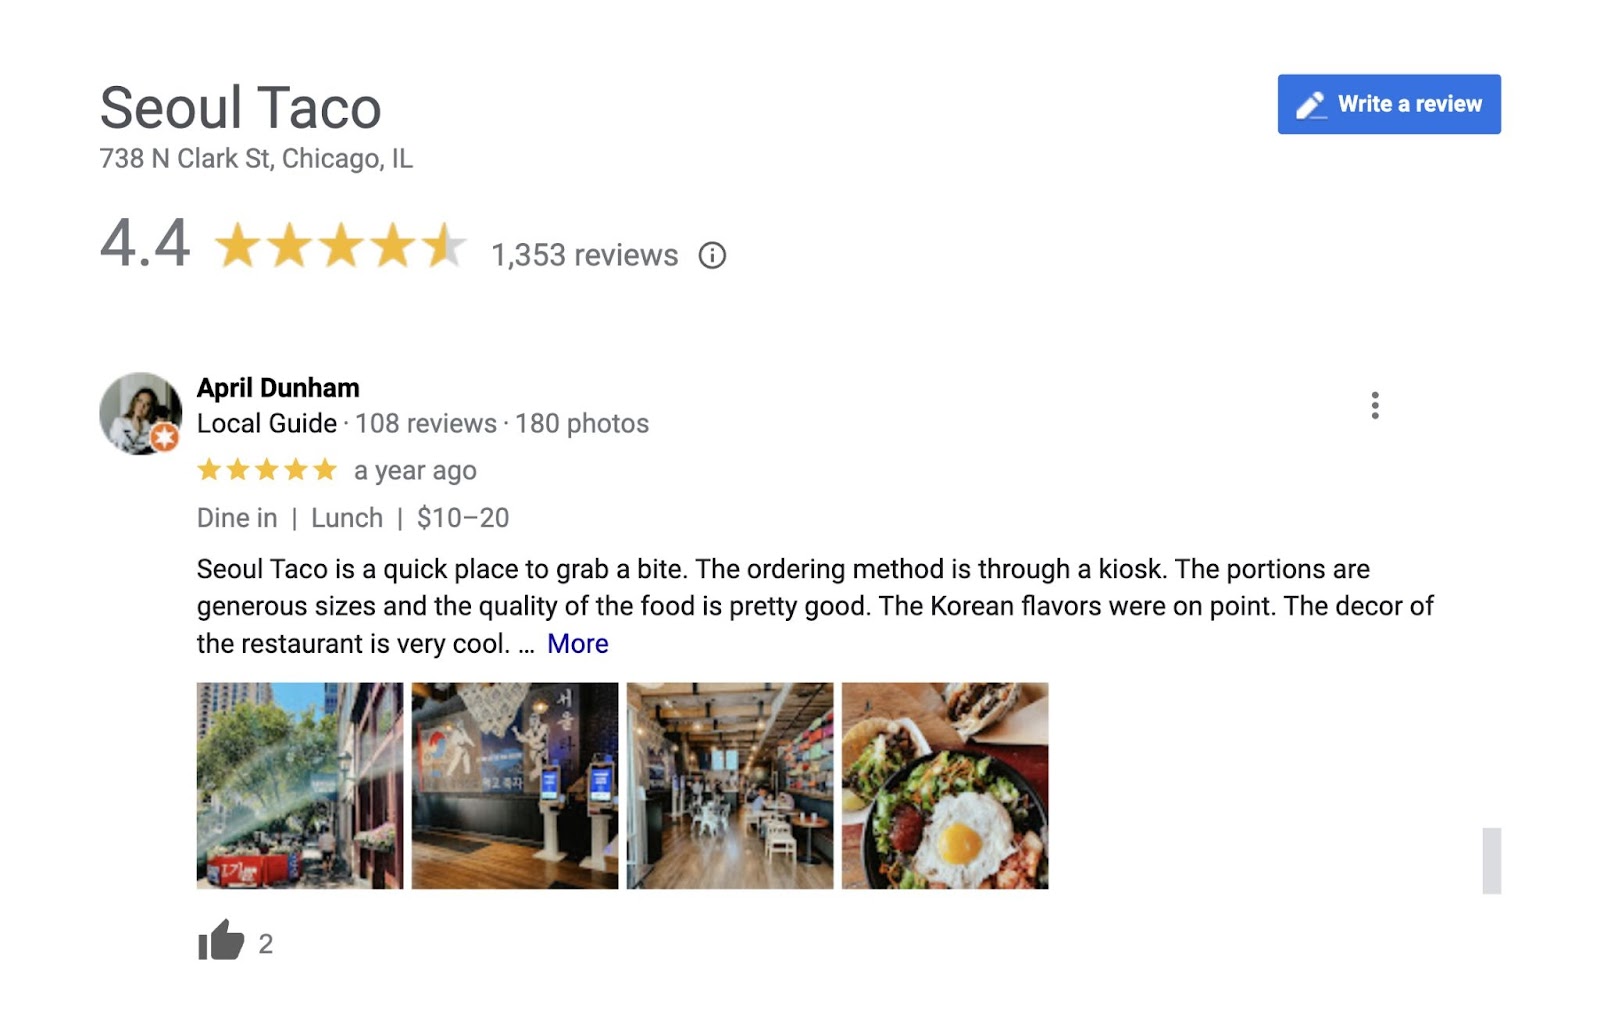 Customer review for "Seoul Taco" on Google